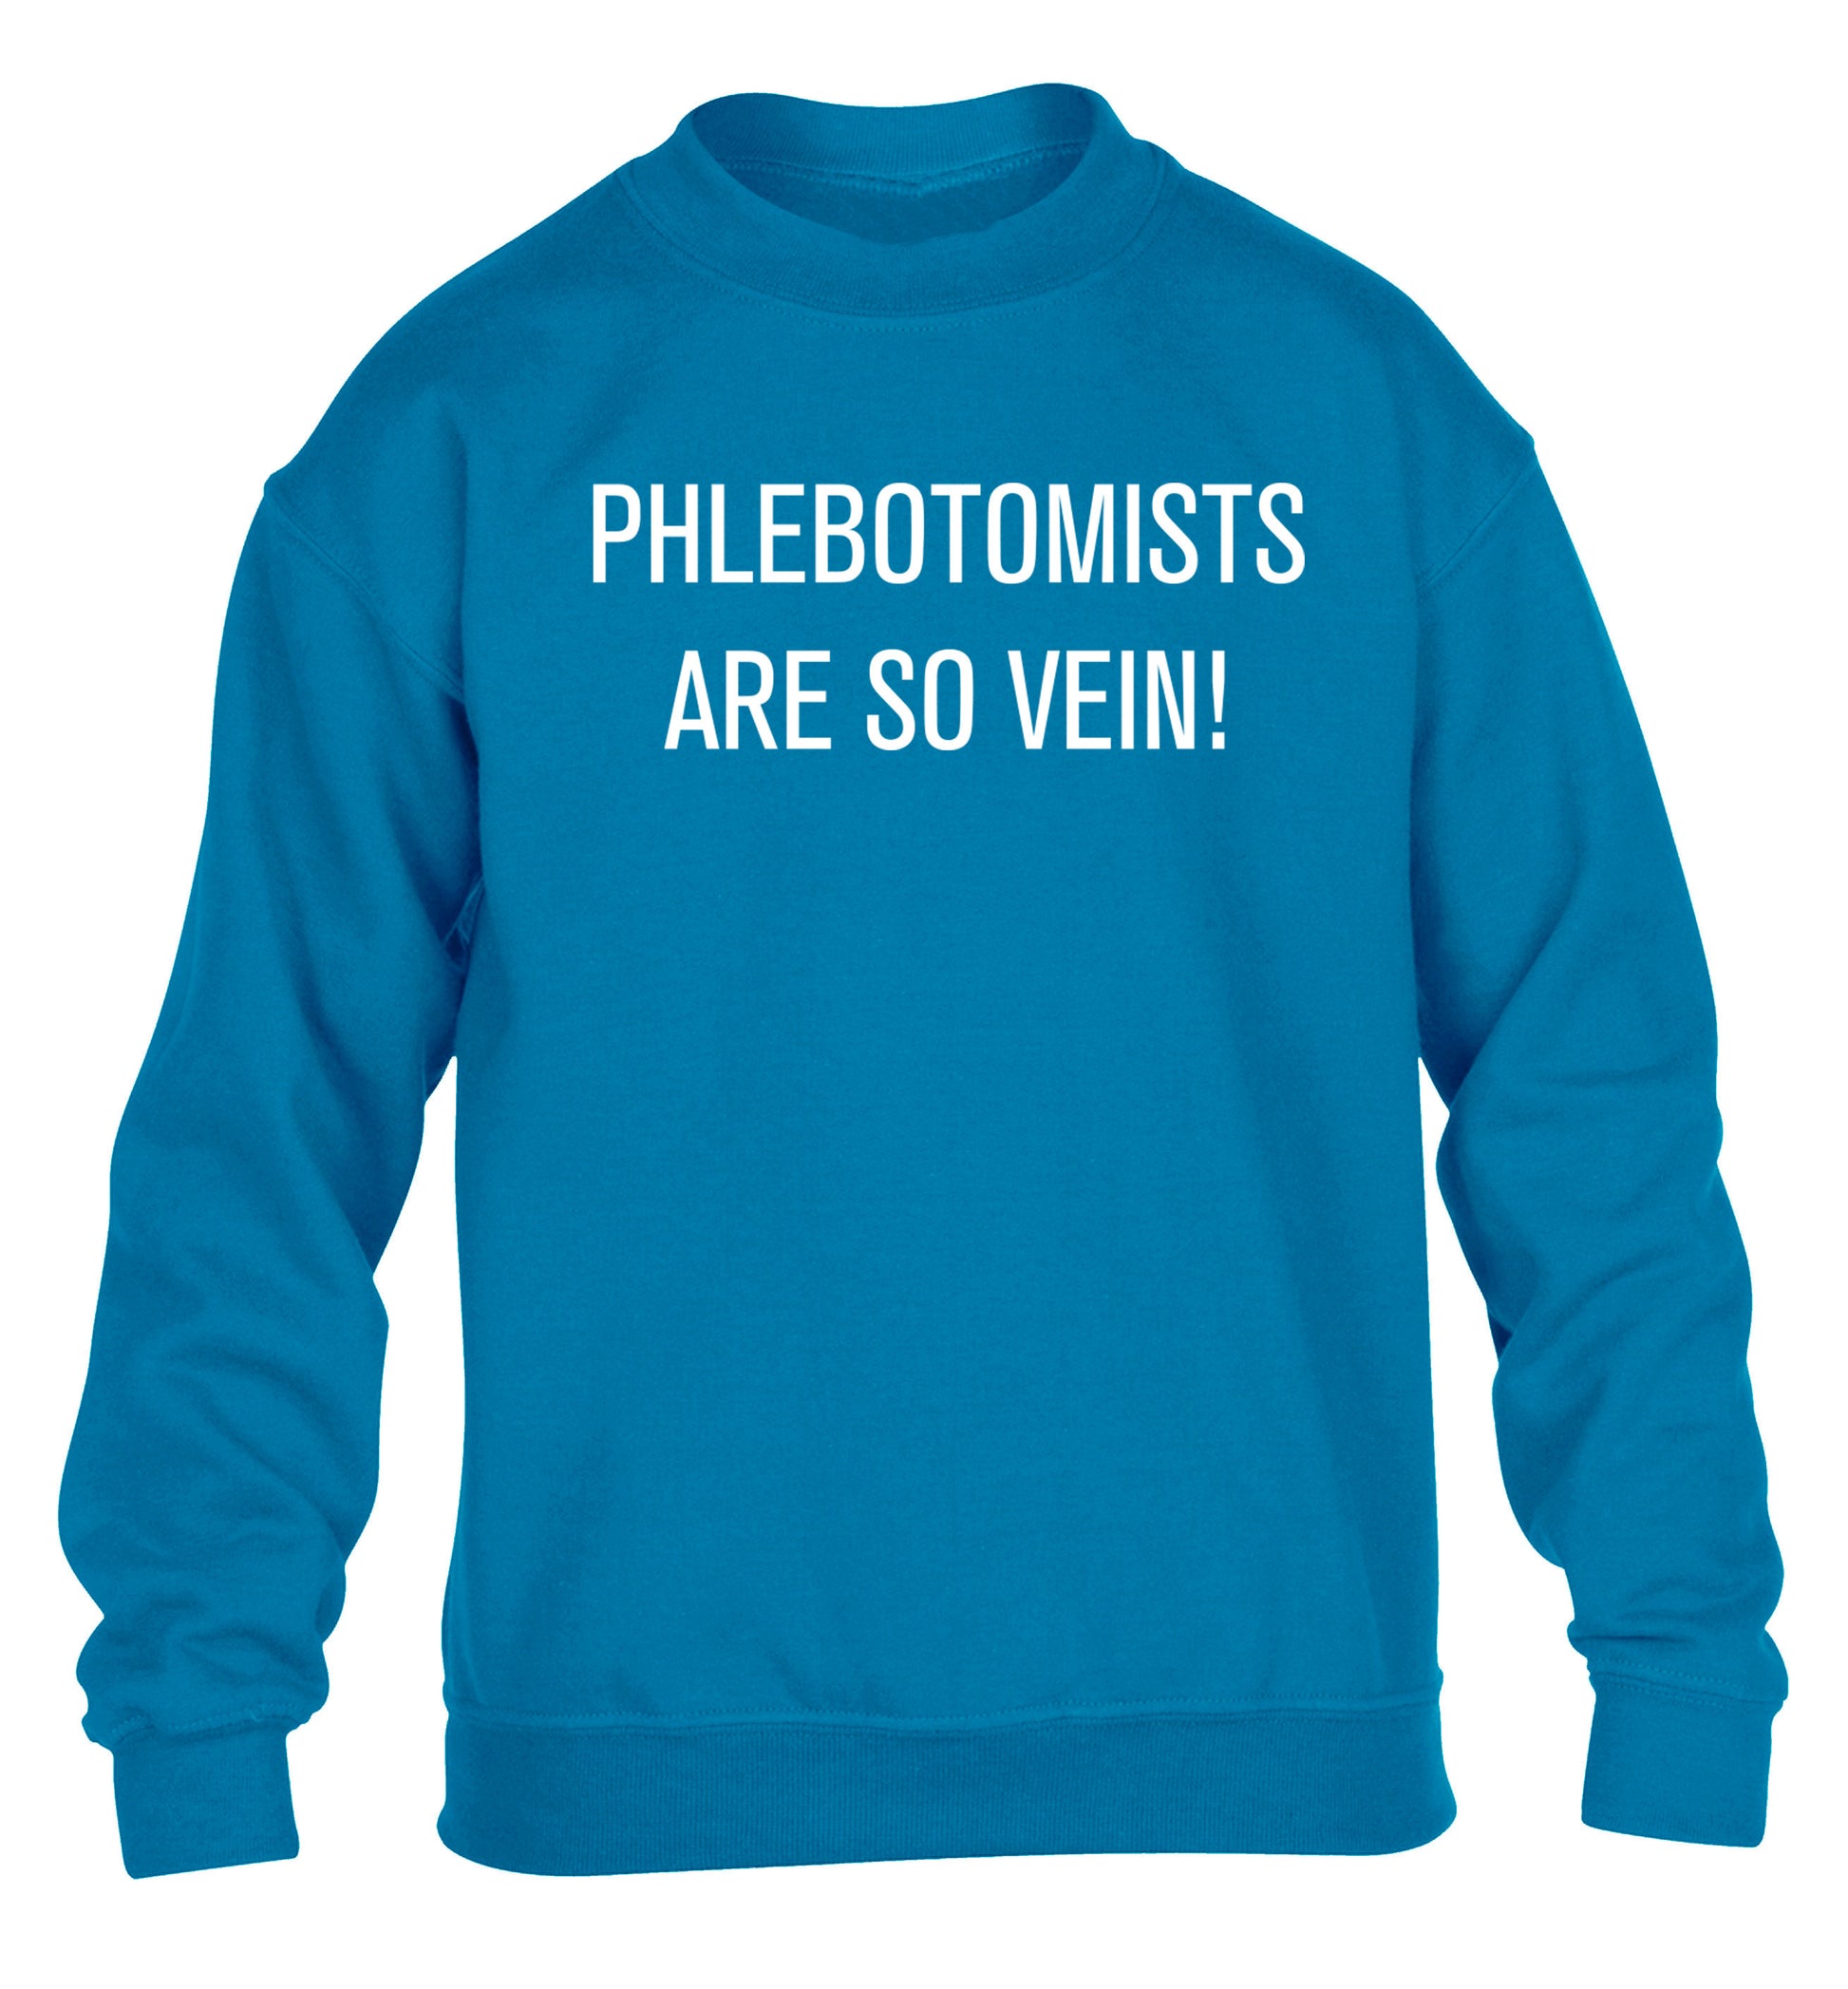 Phlebotomists are so vein! children's blue sweater 12-14 Years